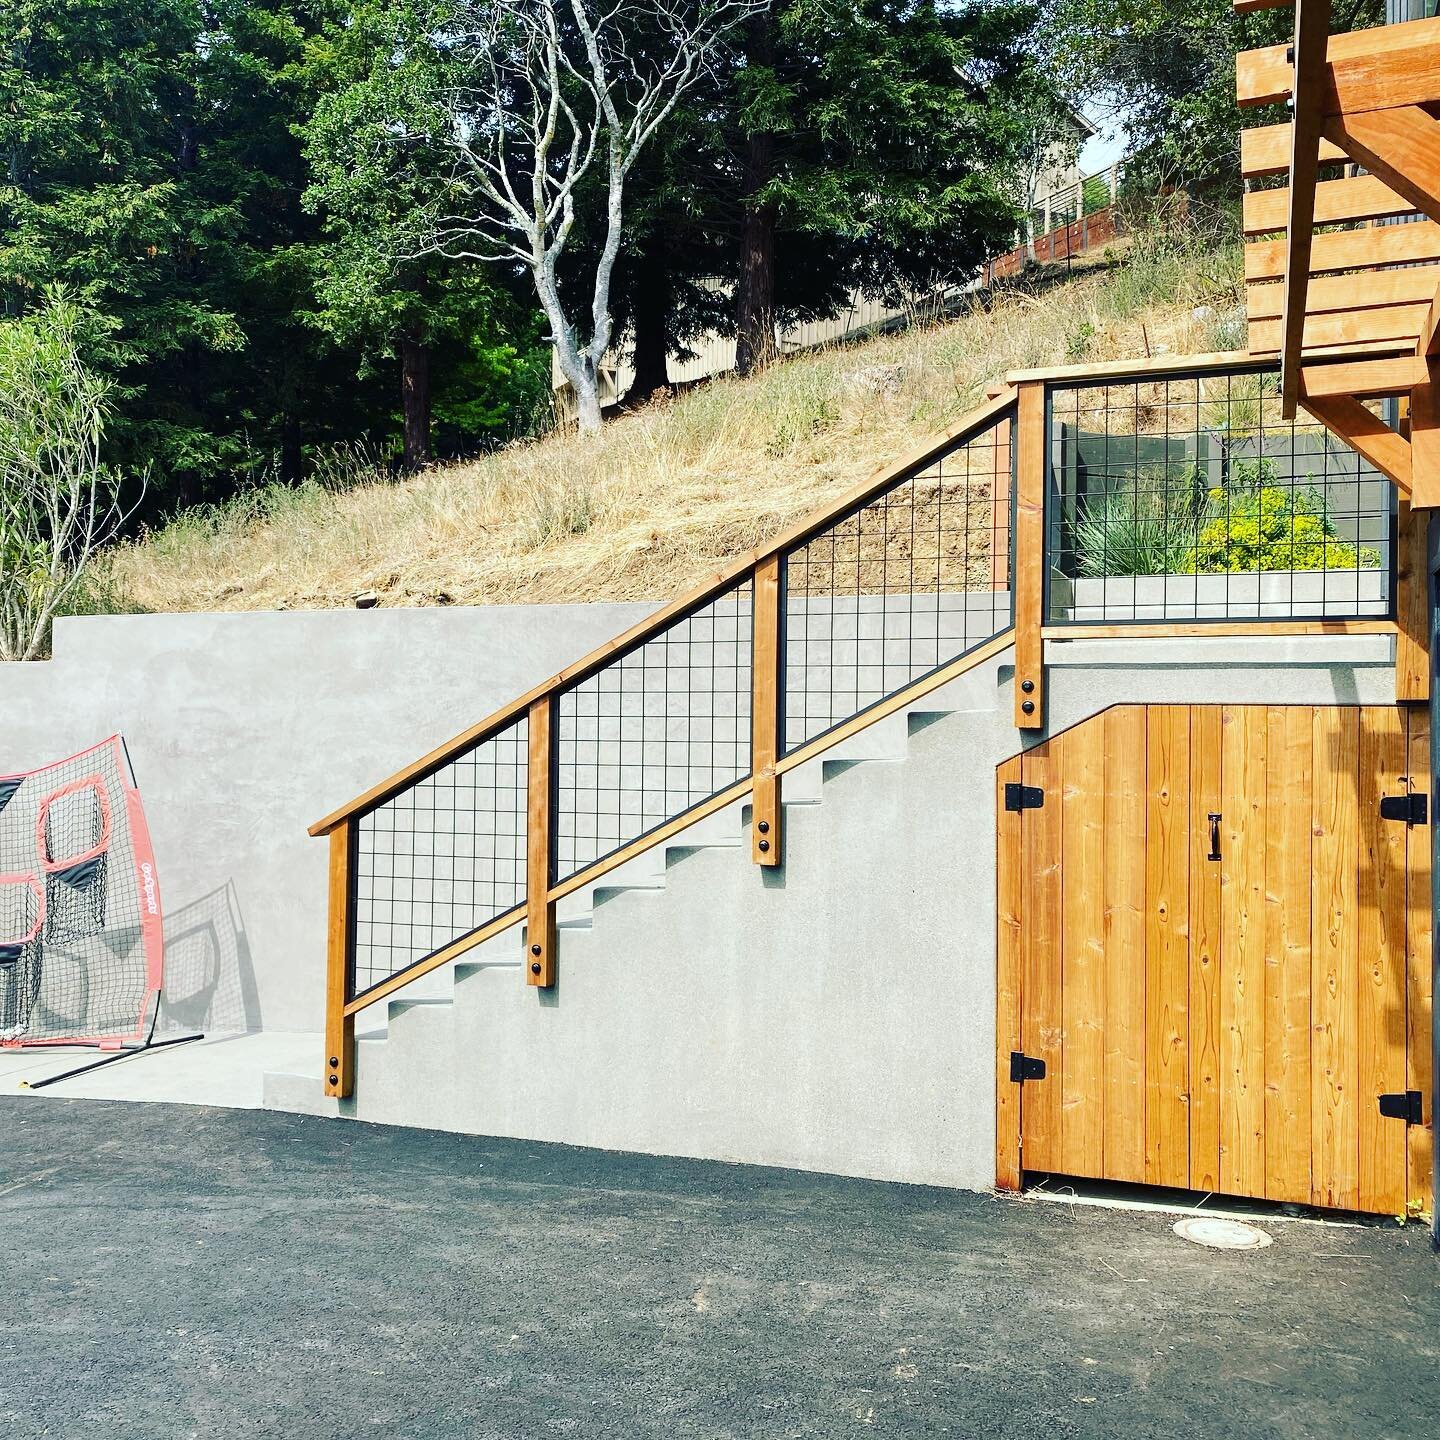 *before and after* shots of a project we&rsquo;re wrapping up for some awesome clients in Tam Valley. Replaced some old failing walls and stairs with a structurally sound concrete wall and entry stairway. Redwood &amp; @wildhogproducts handrail. #mar